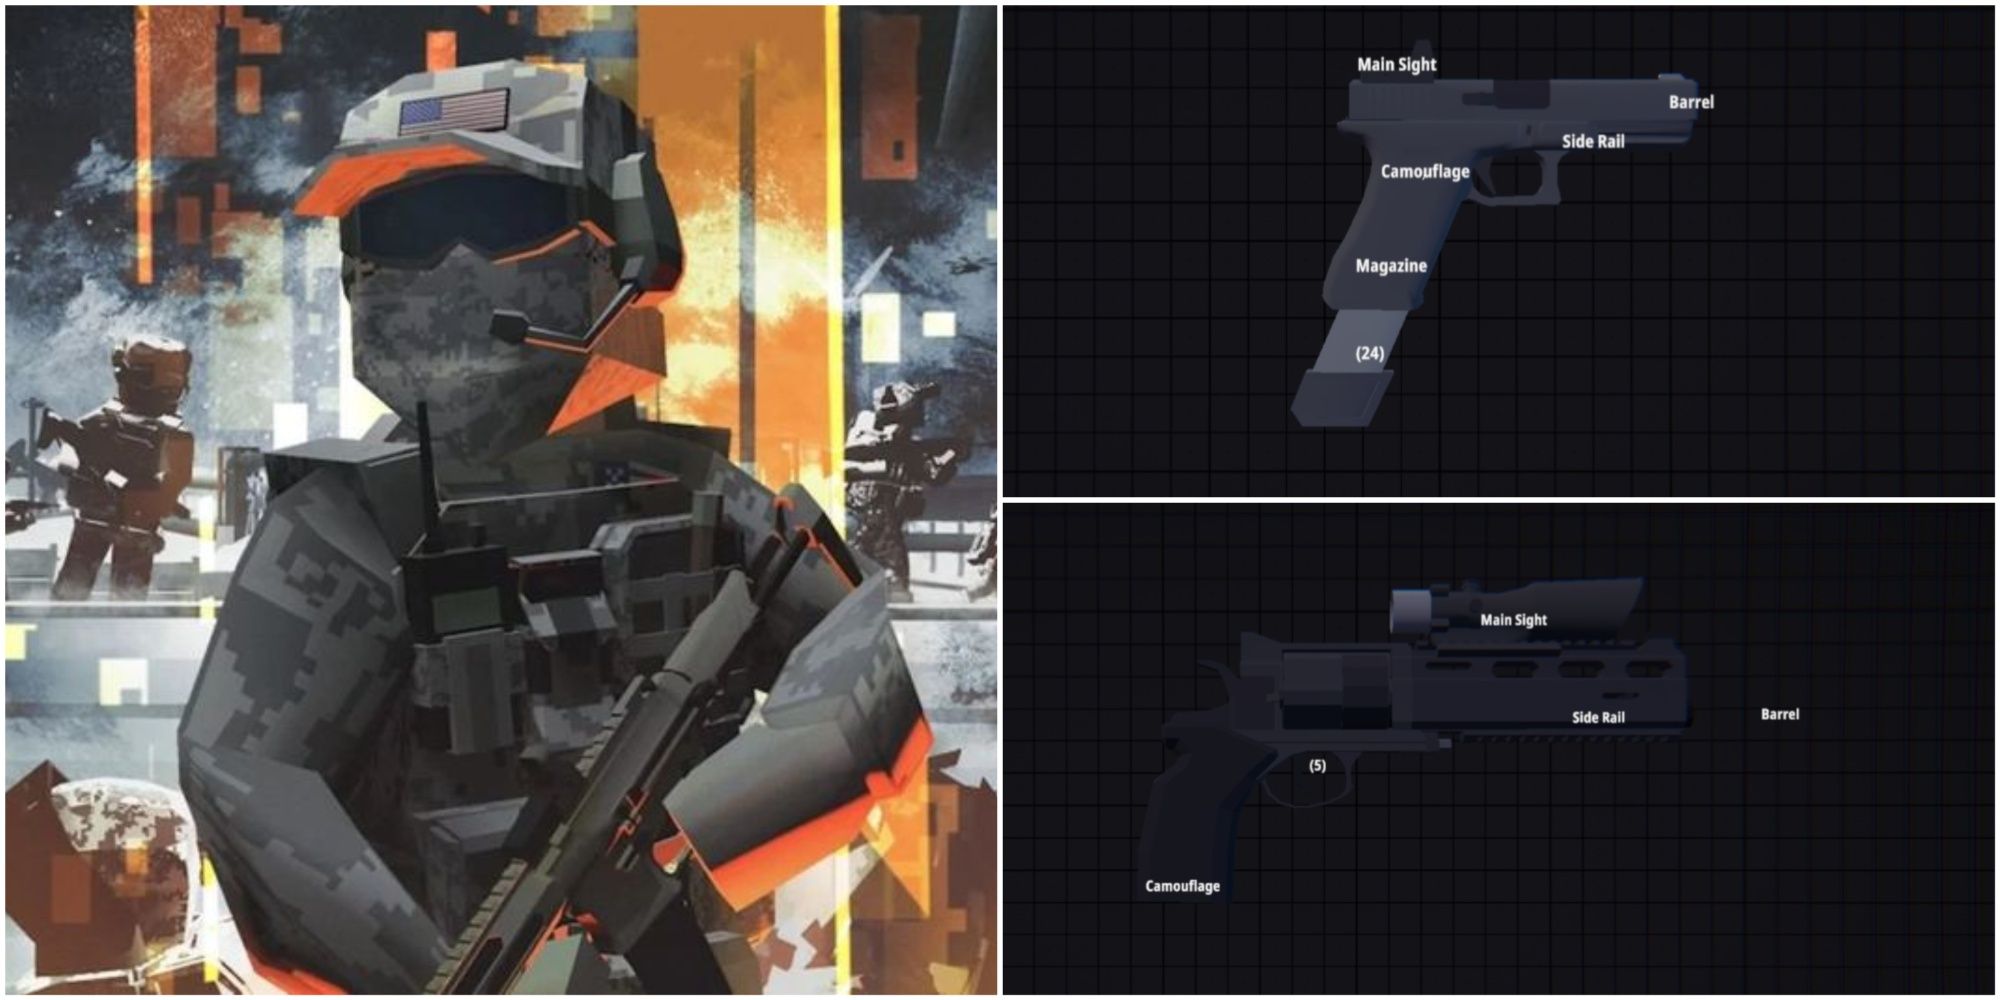 BattleBit Remastered official marketing art (left), Glock 18 automatic pistol (top right), Rsh12 revolver with magnified scope (bottom right)